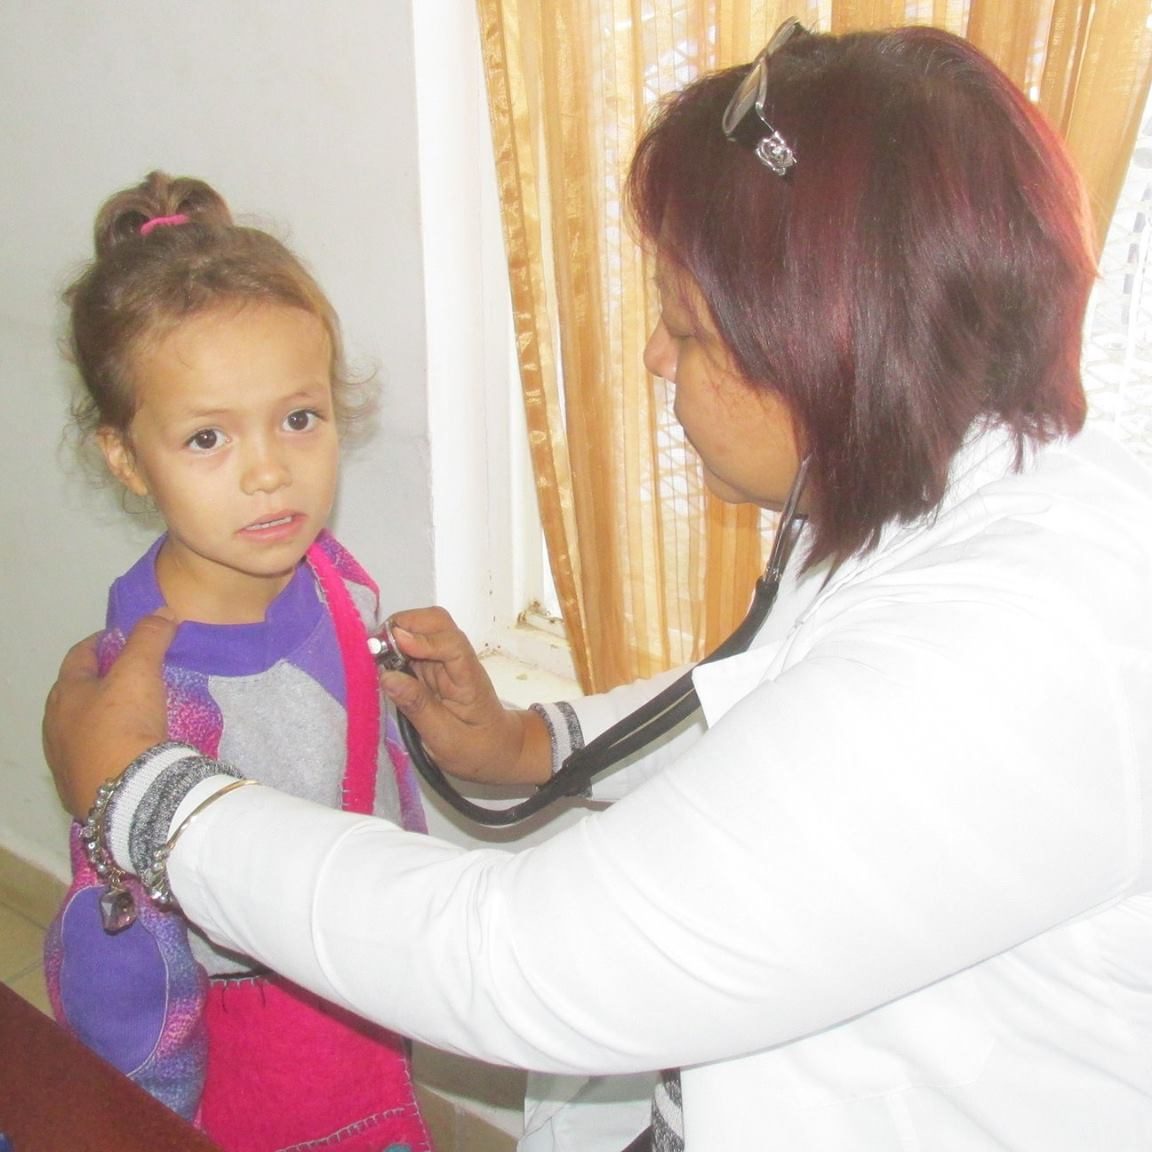 Doctor examining  young patient.